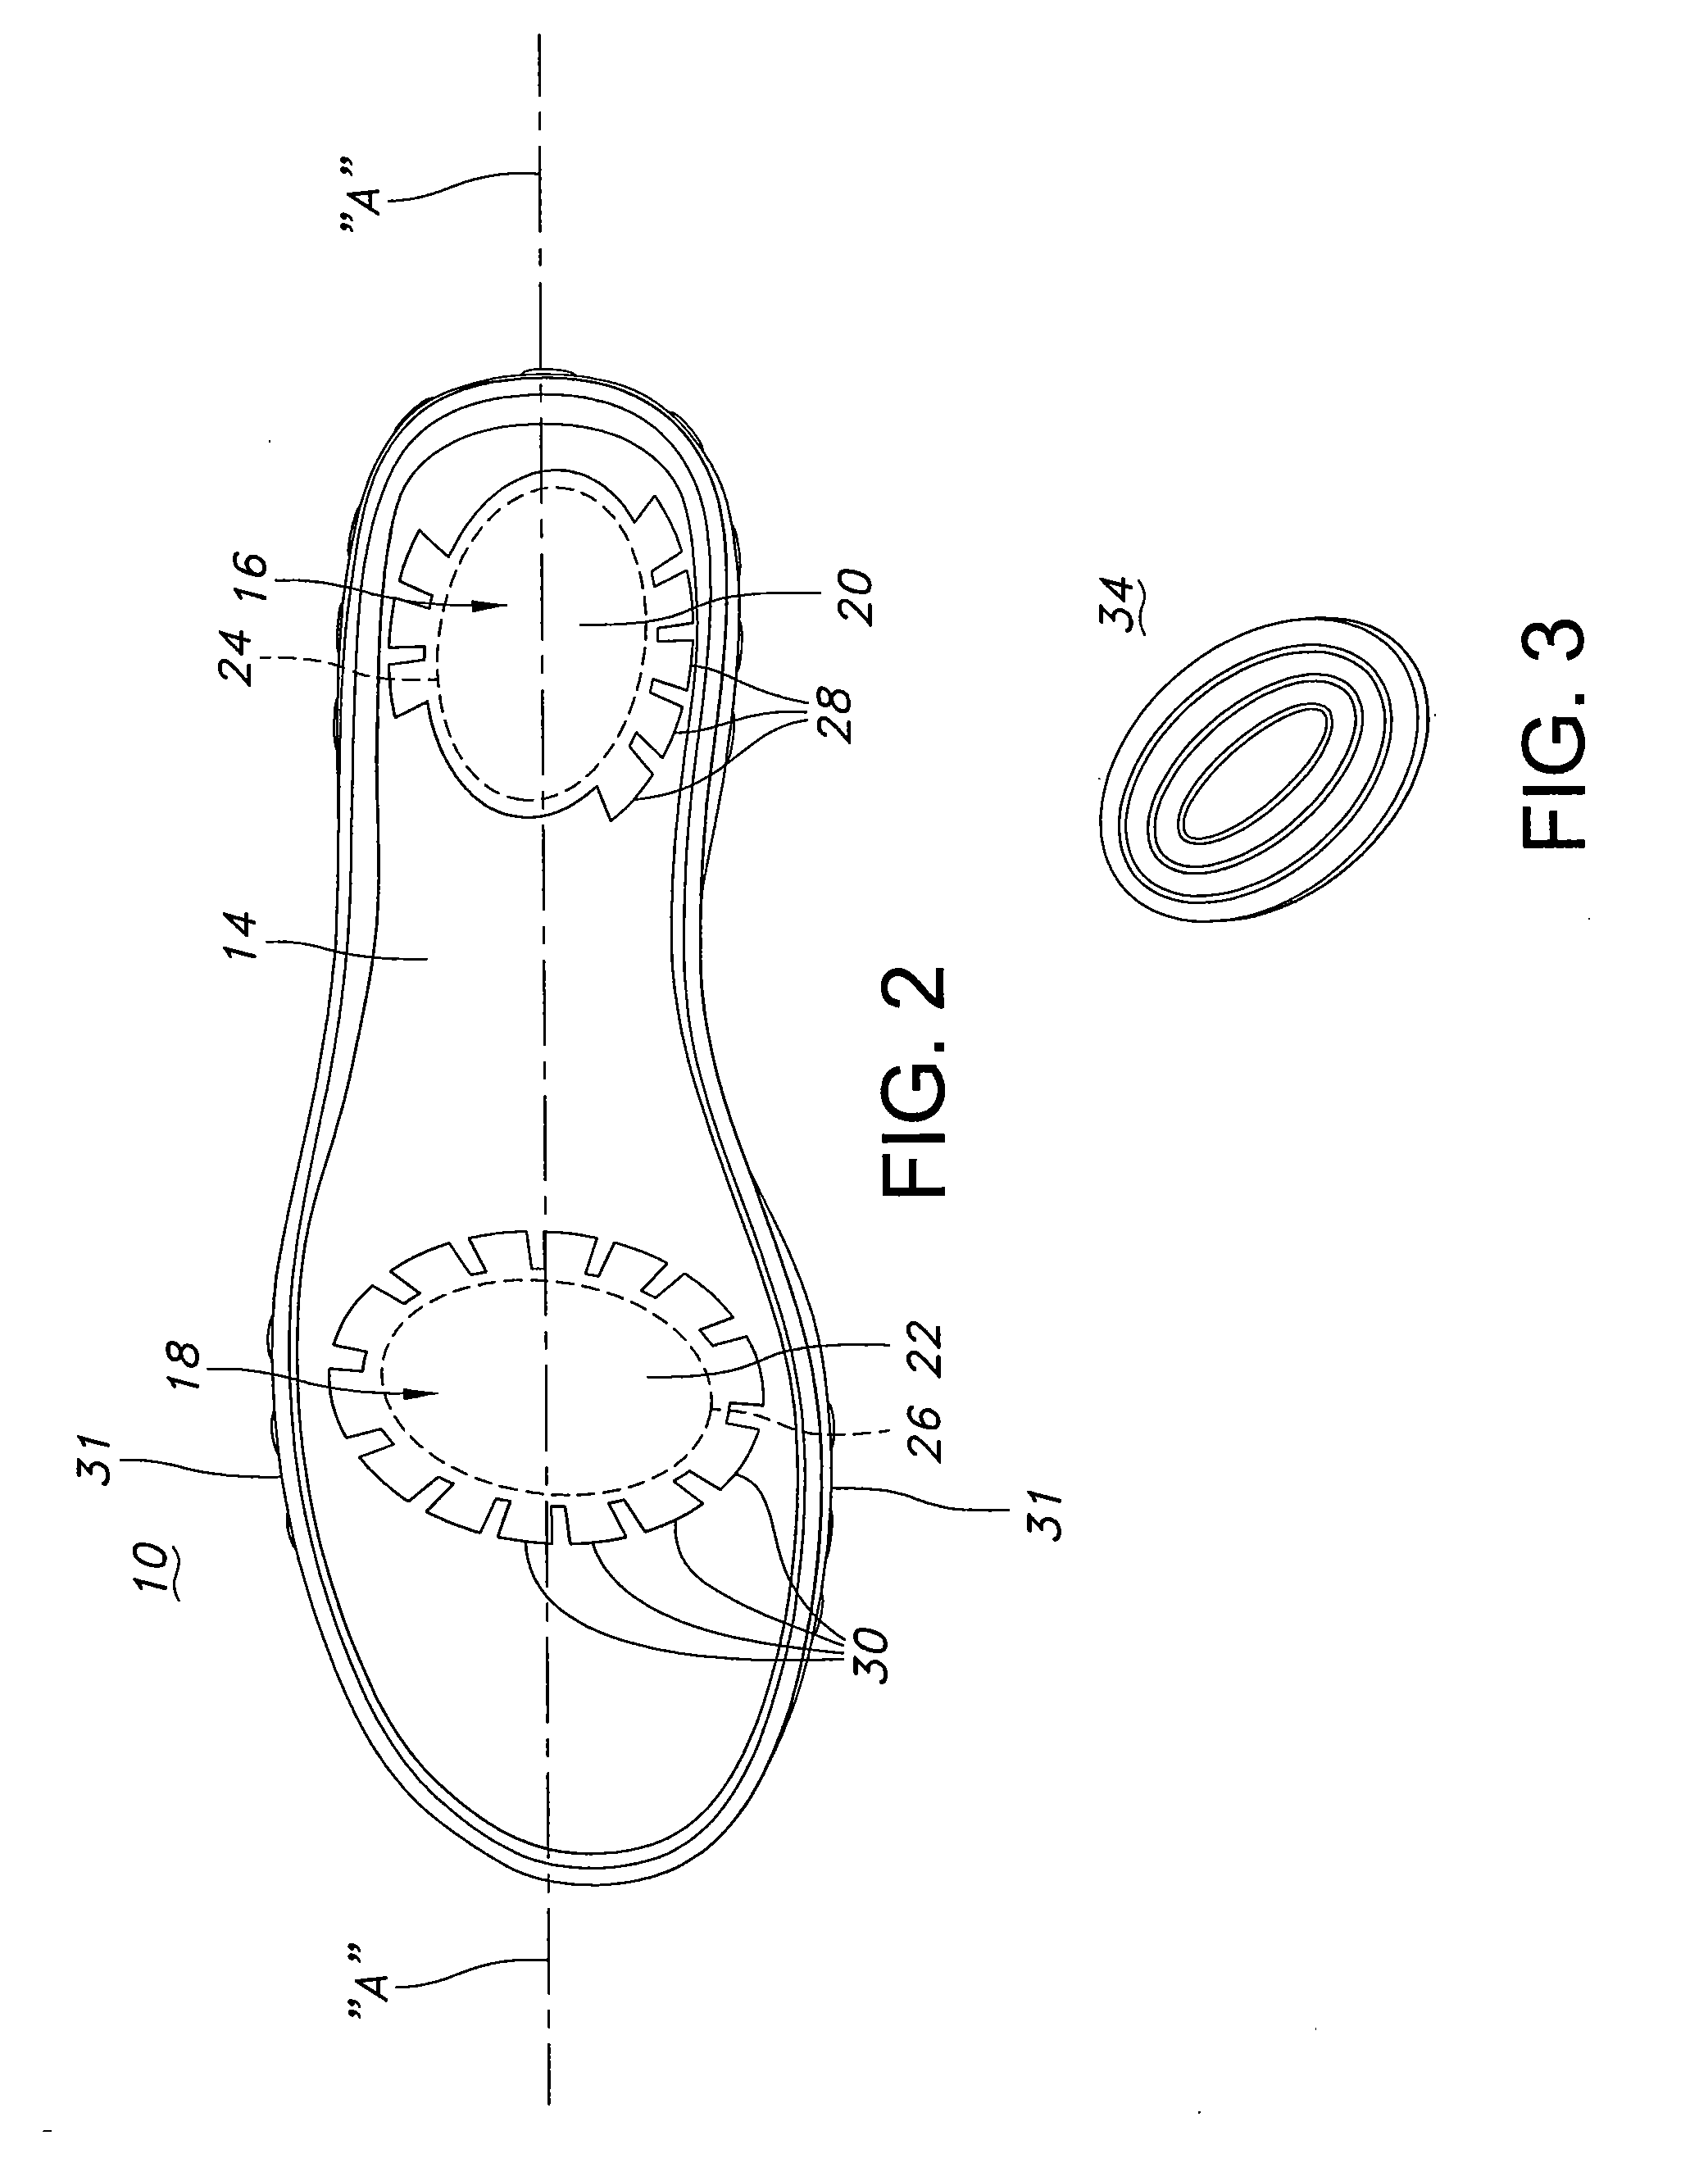 Orthotic shoe and insole assemblies